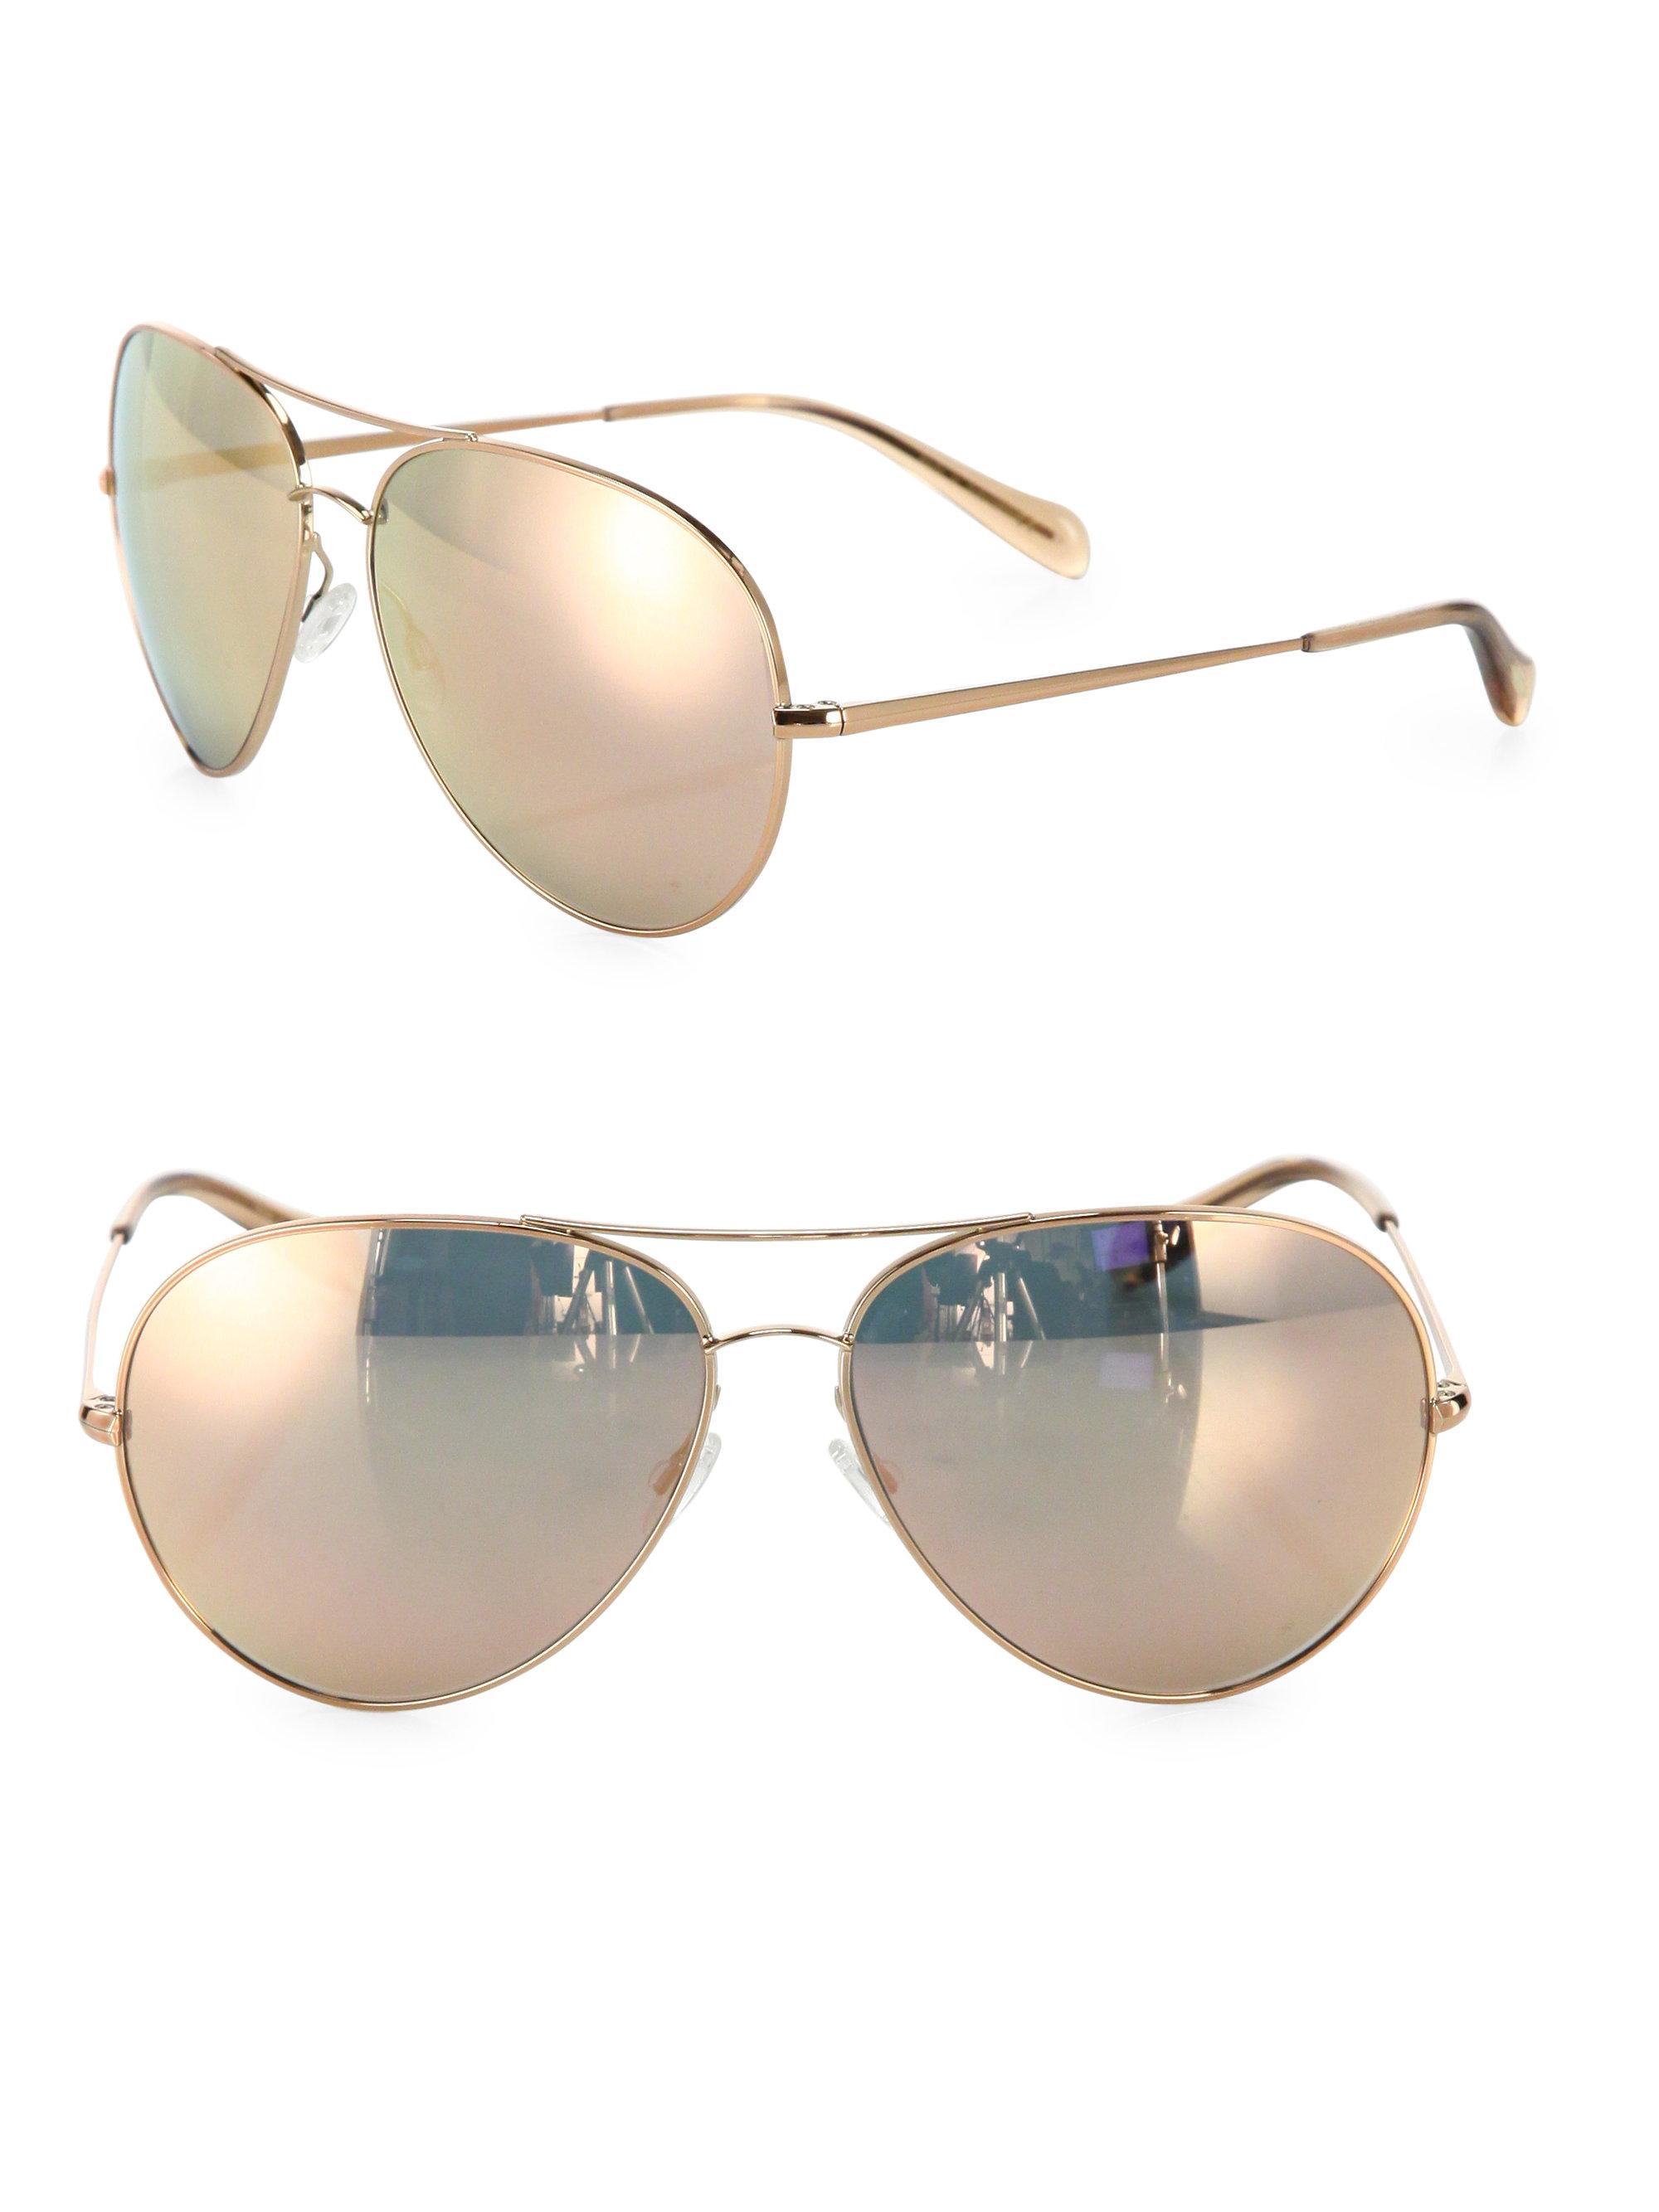 Oliver Peoples Sayer 63mm Mirrored Aviator Sunglasses in Pink | Lyst